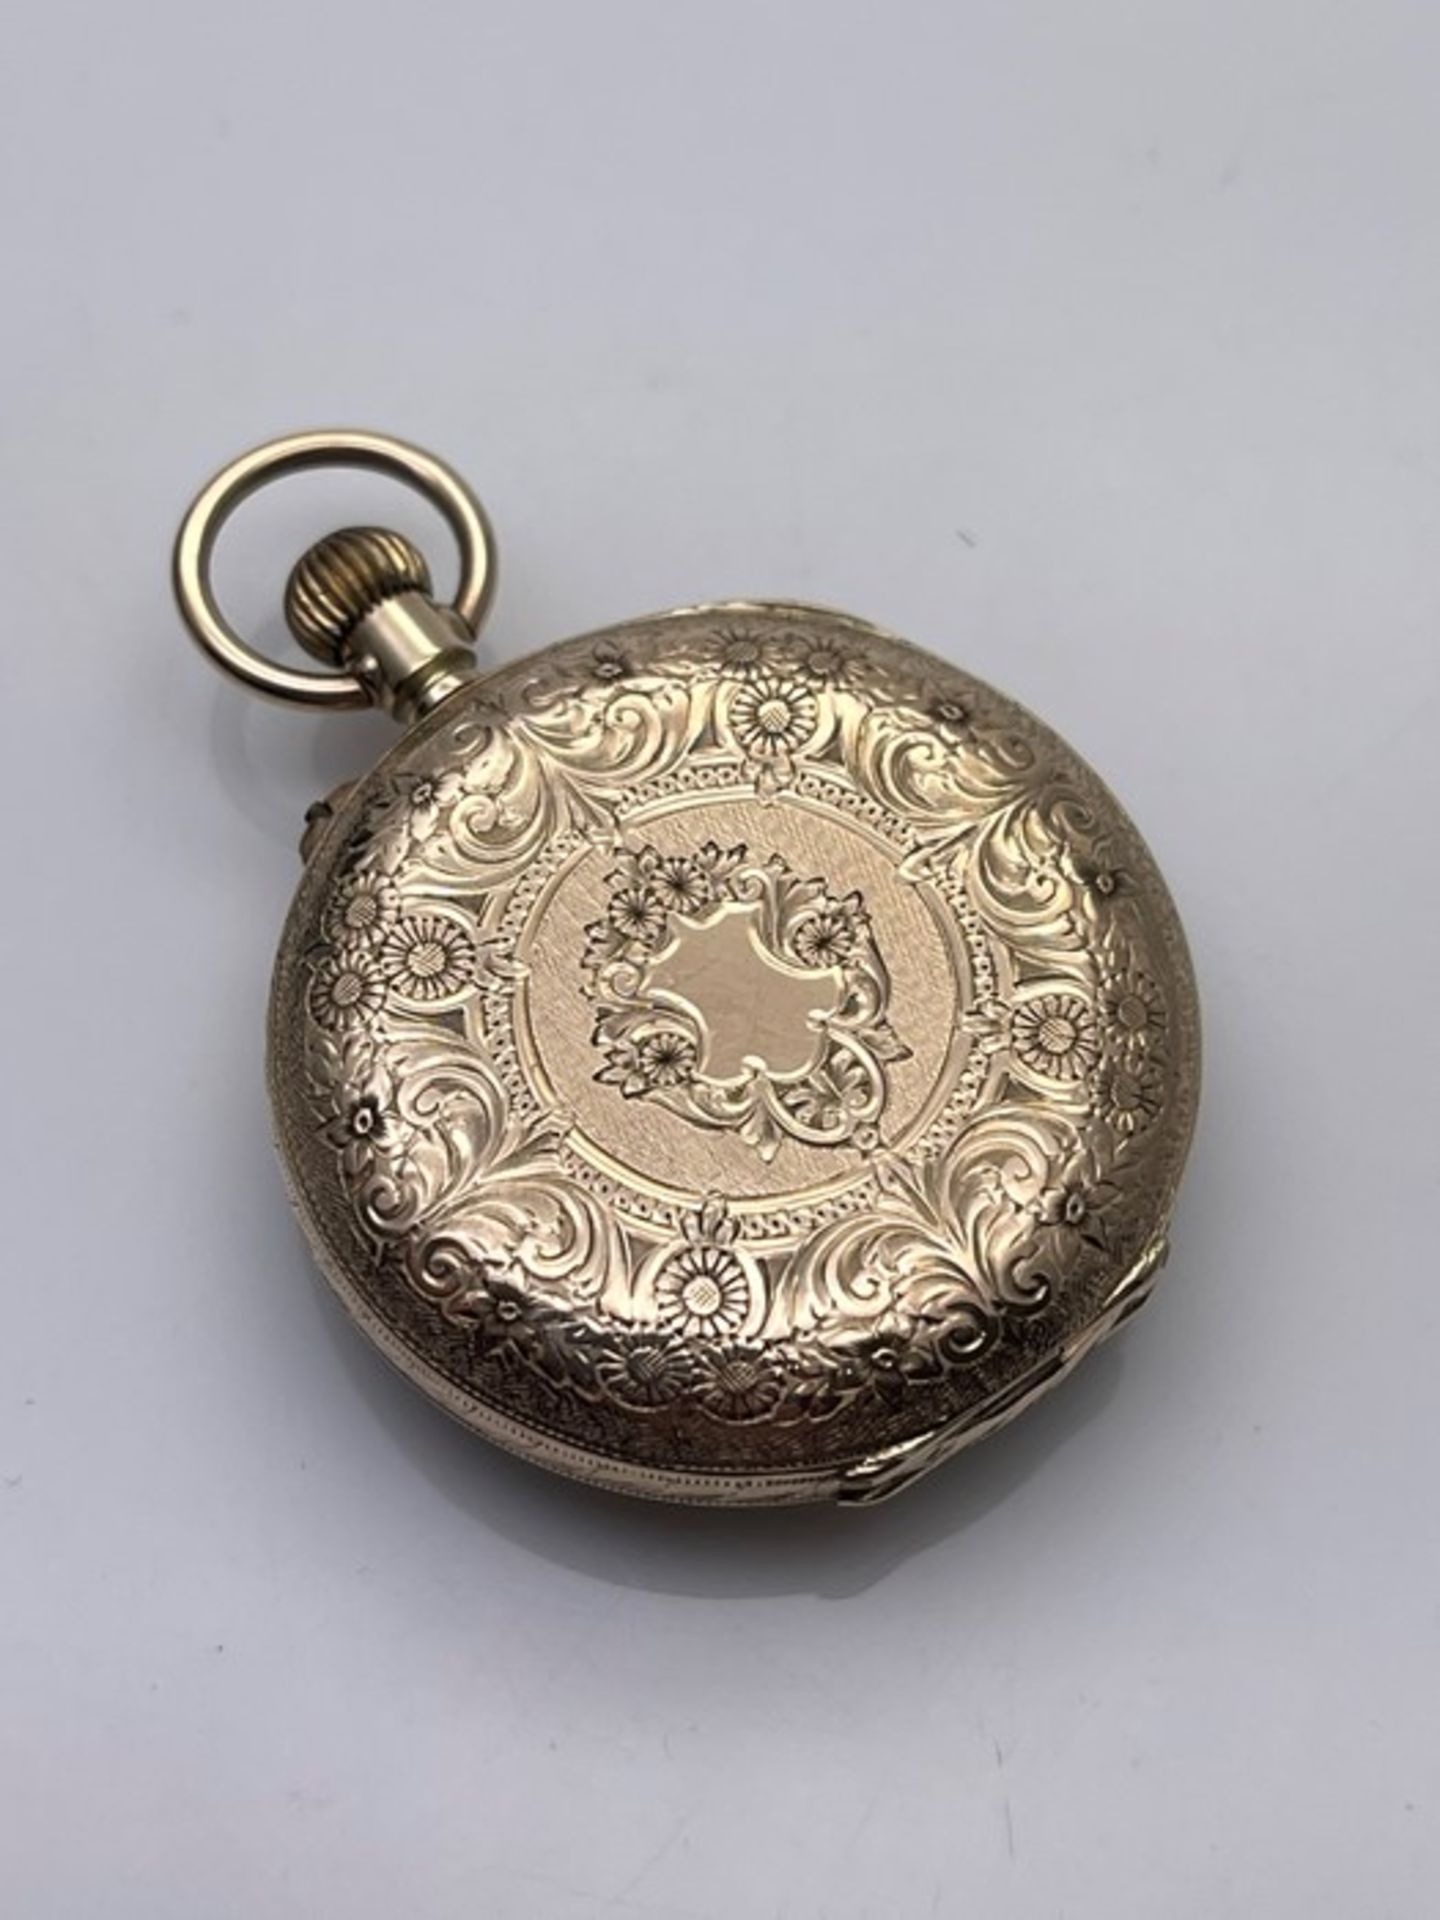 9CT YELLOW GOLD LADIES POCKET WATCH, MADE BY T.FATTORINI SWISS, DOES NOT APPEAR TO BE WORKING ( - Image 3 of 3